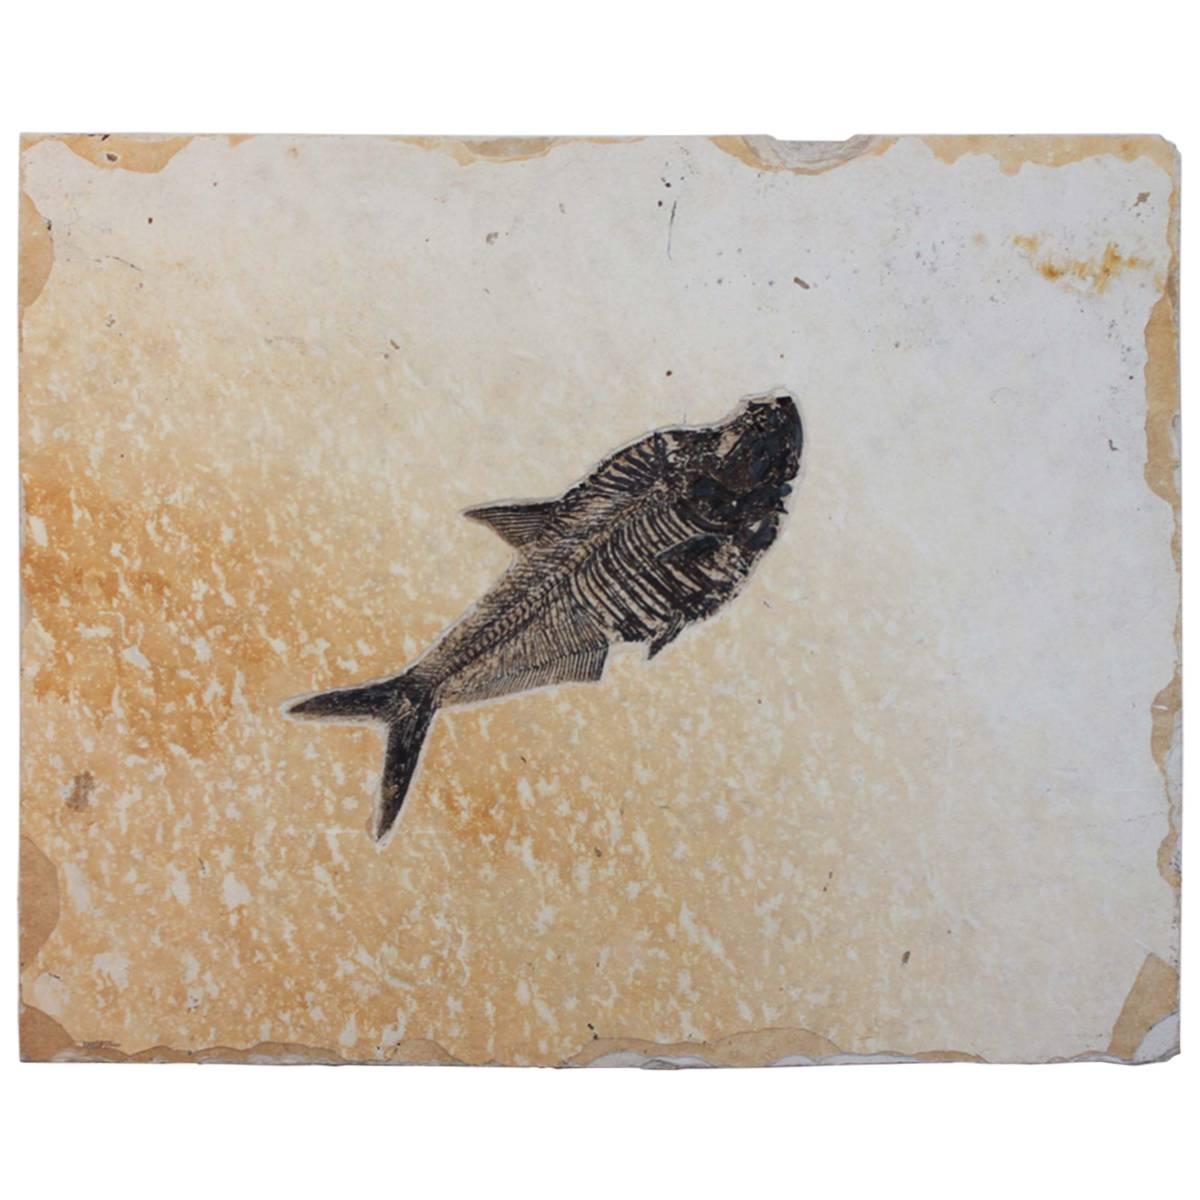 Diplomystus Fish Fossil from the Green River Formation For Sale